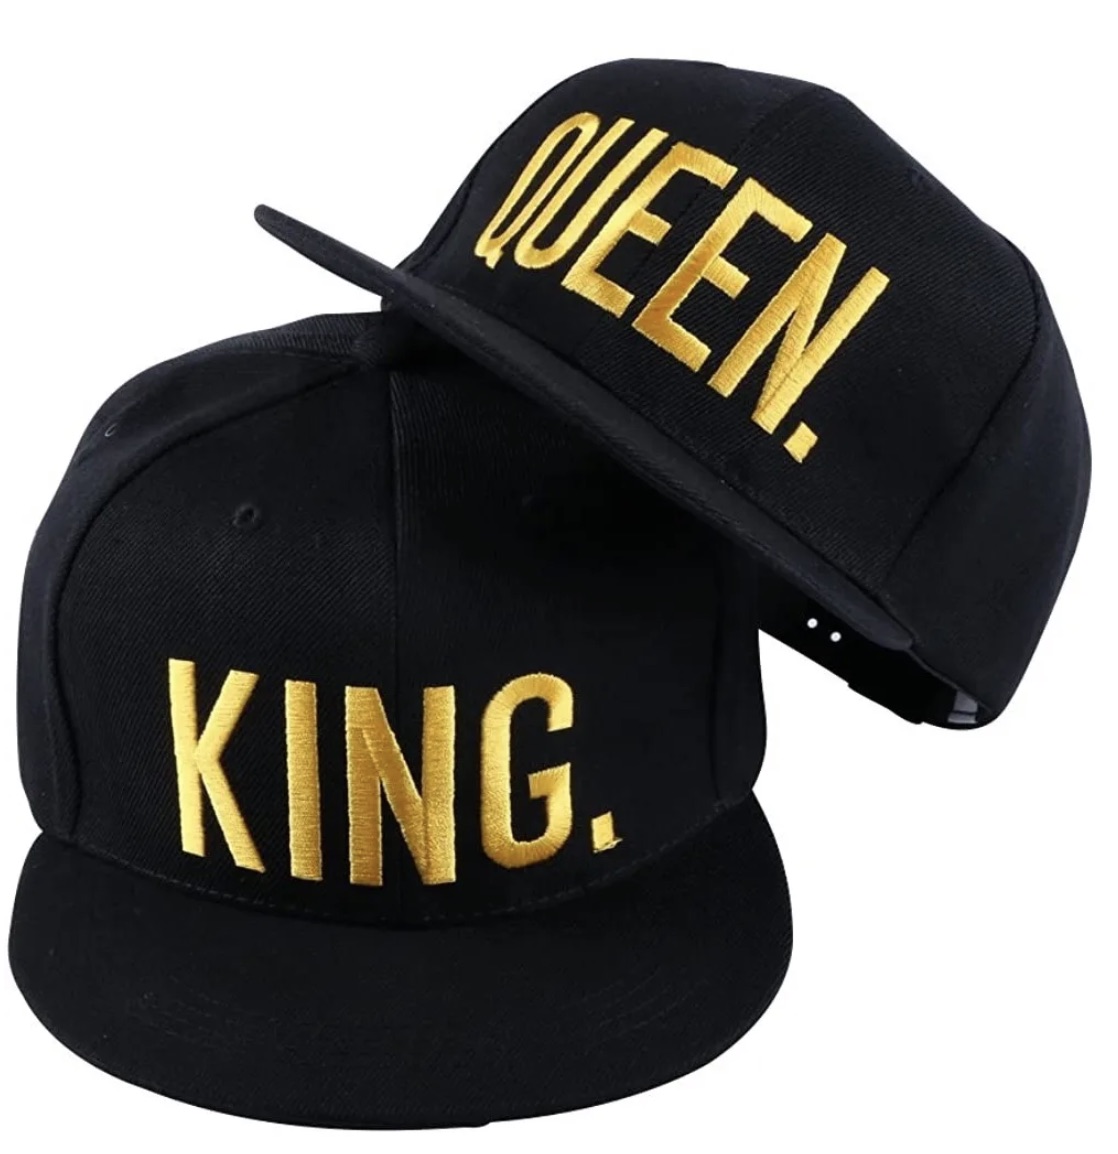 king and queen baseball hats to sell in February